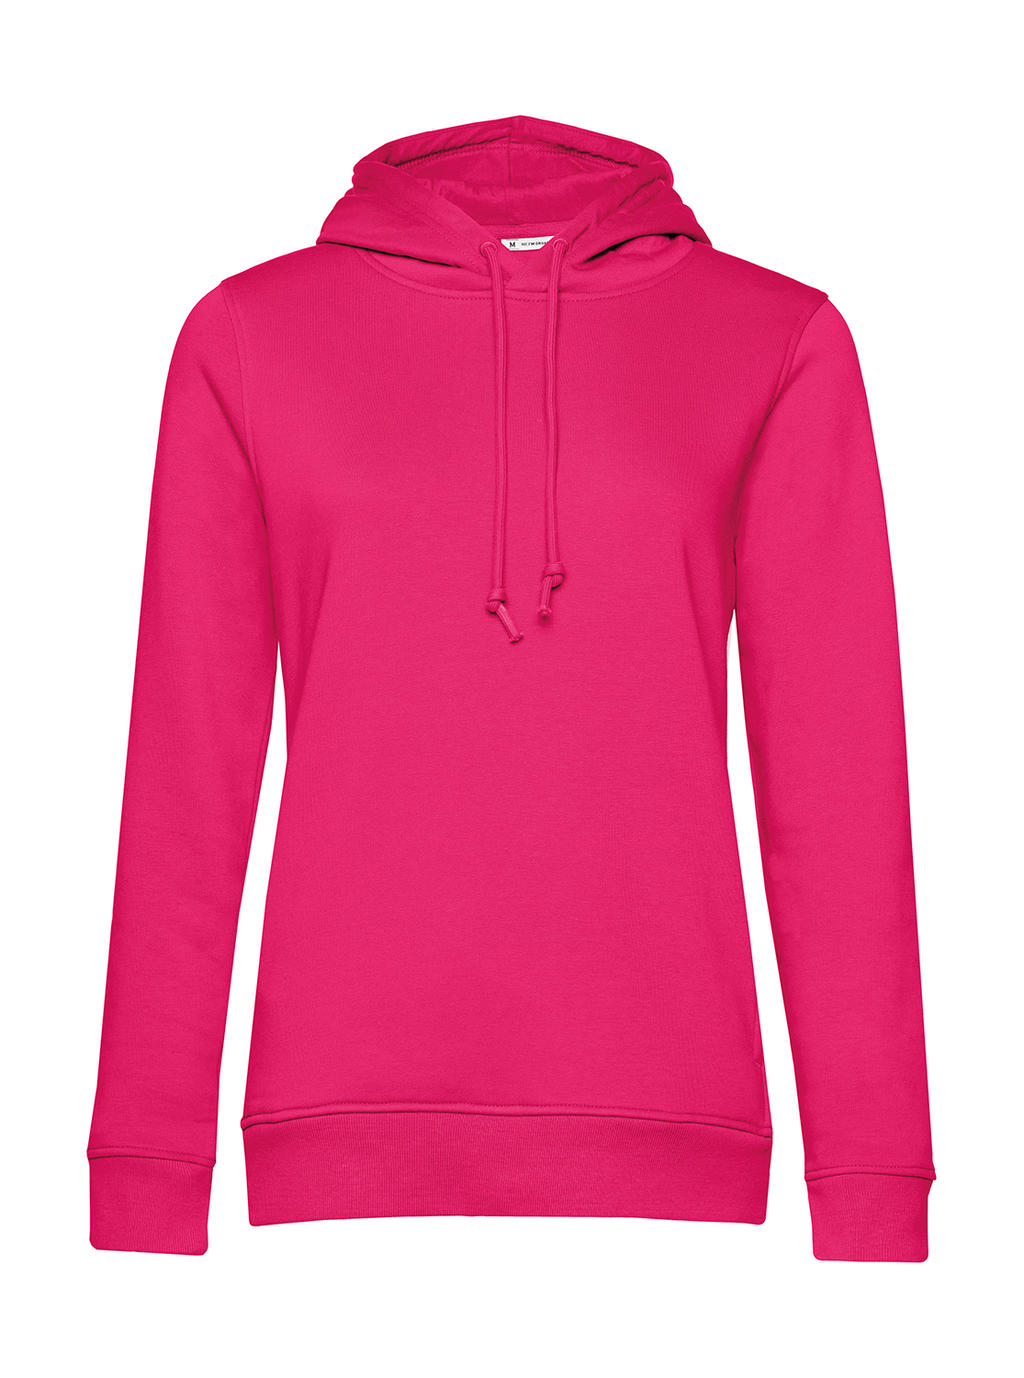  Organic Inspire Hooded /women_? in Farbe Magenta Pink